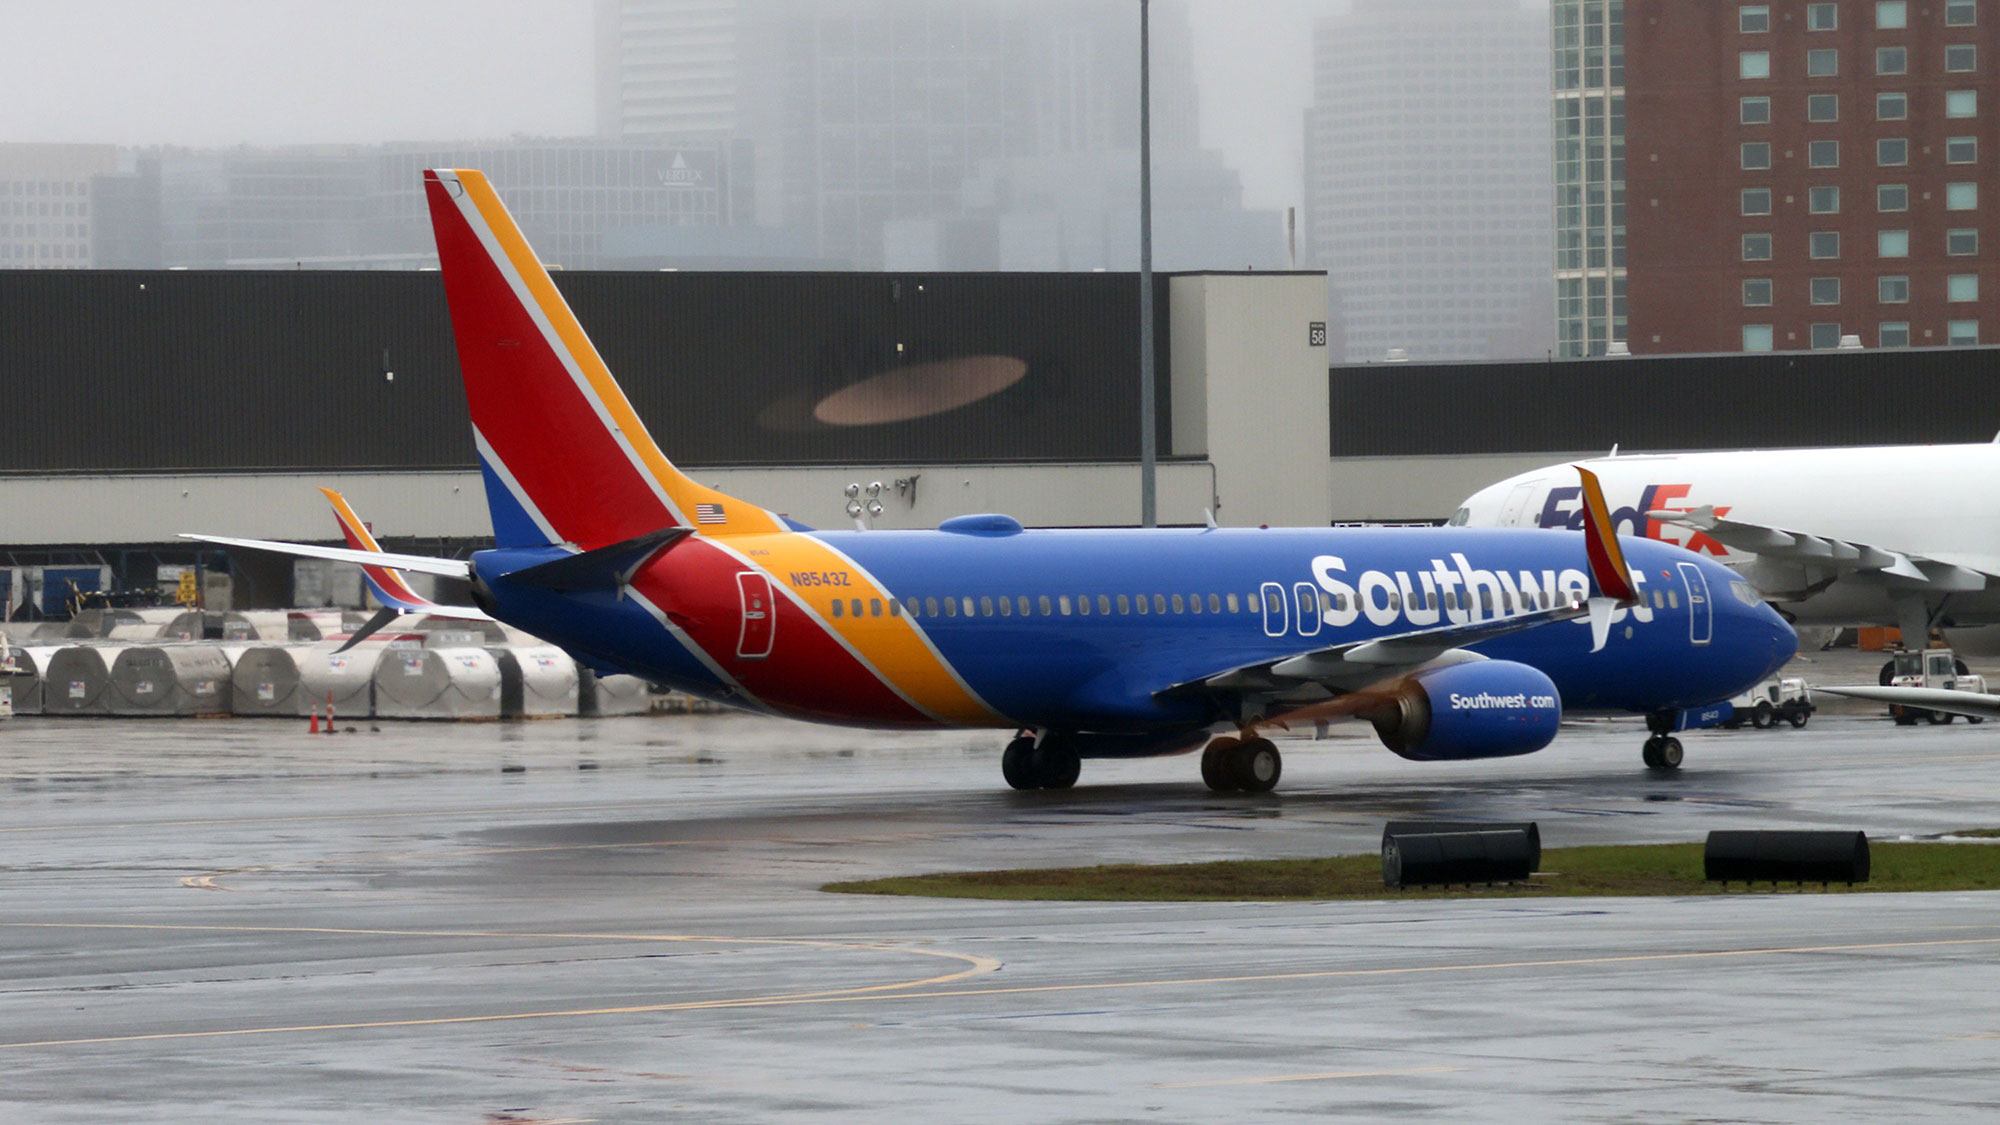 Southwest Boeing 737-800 lost engine cover, FAA says